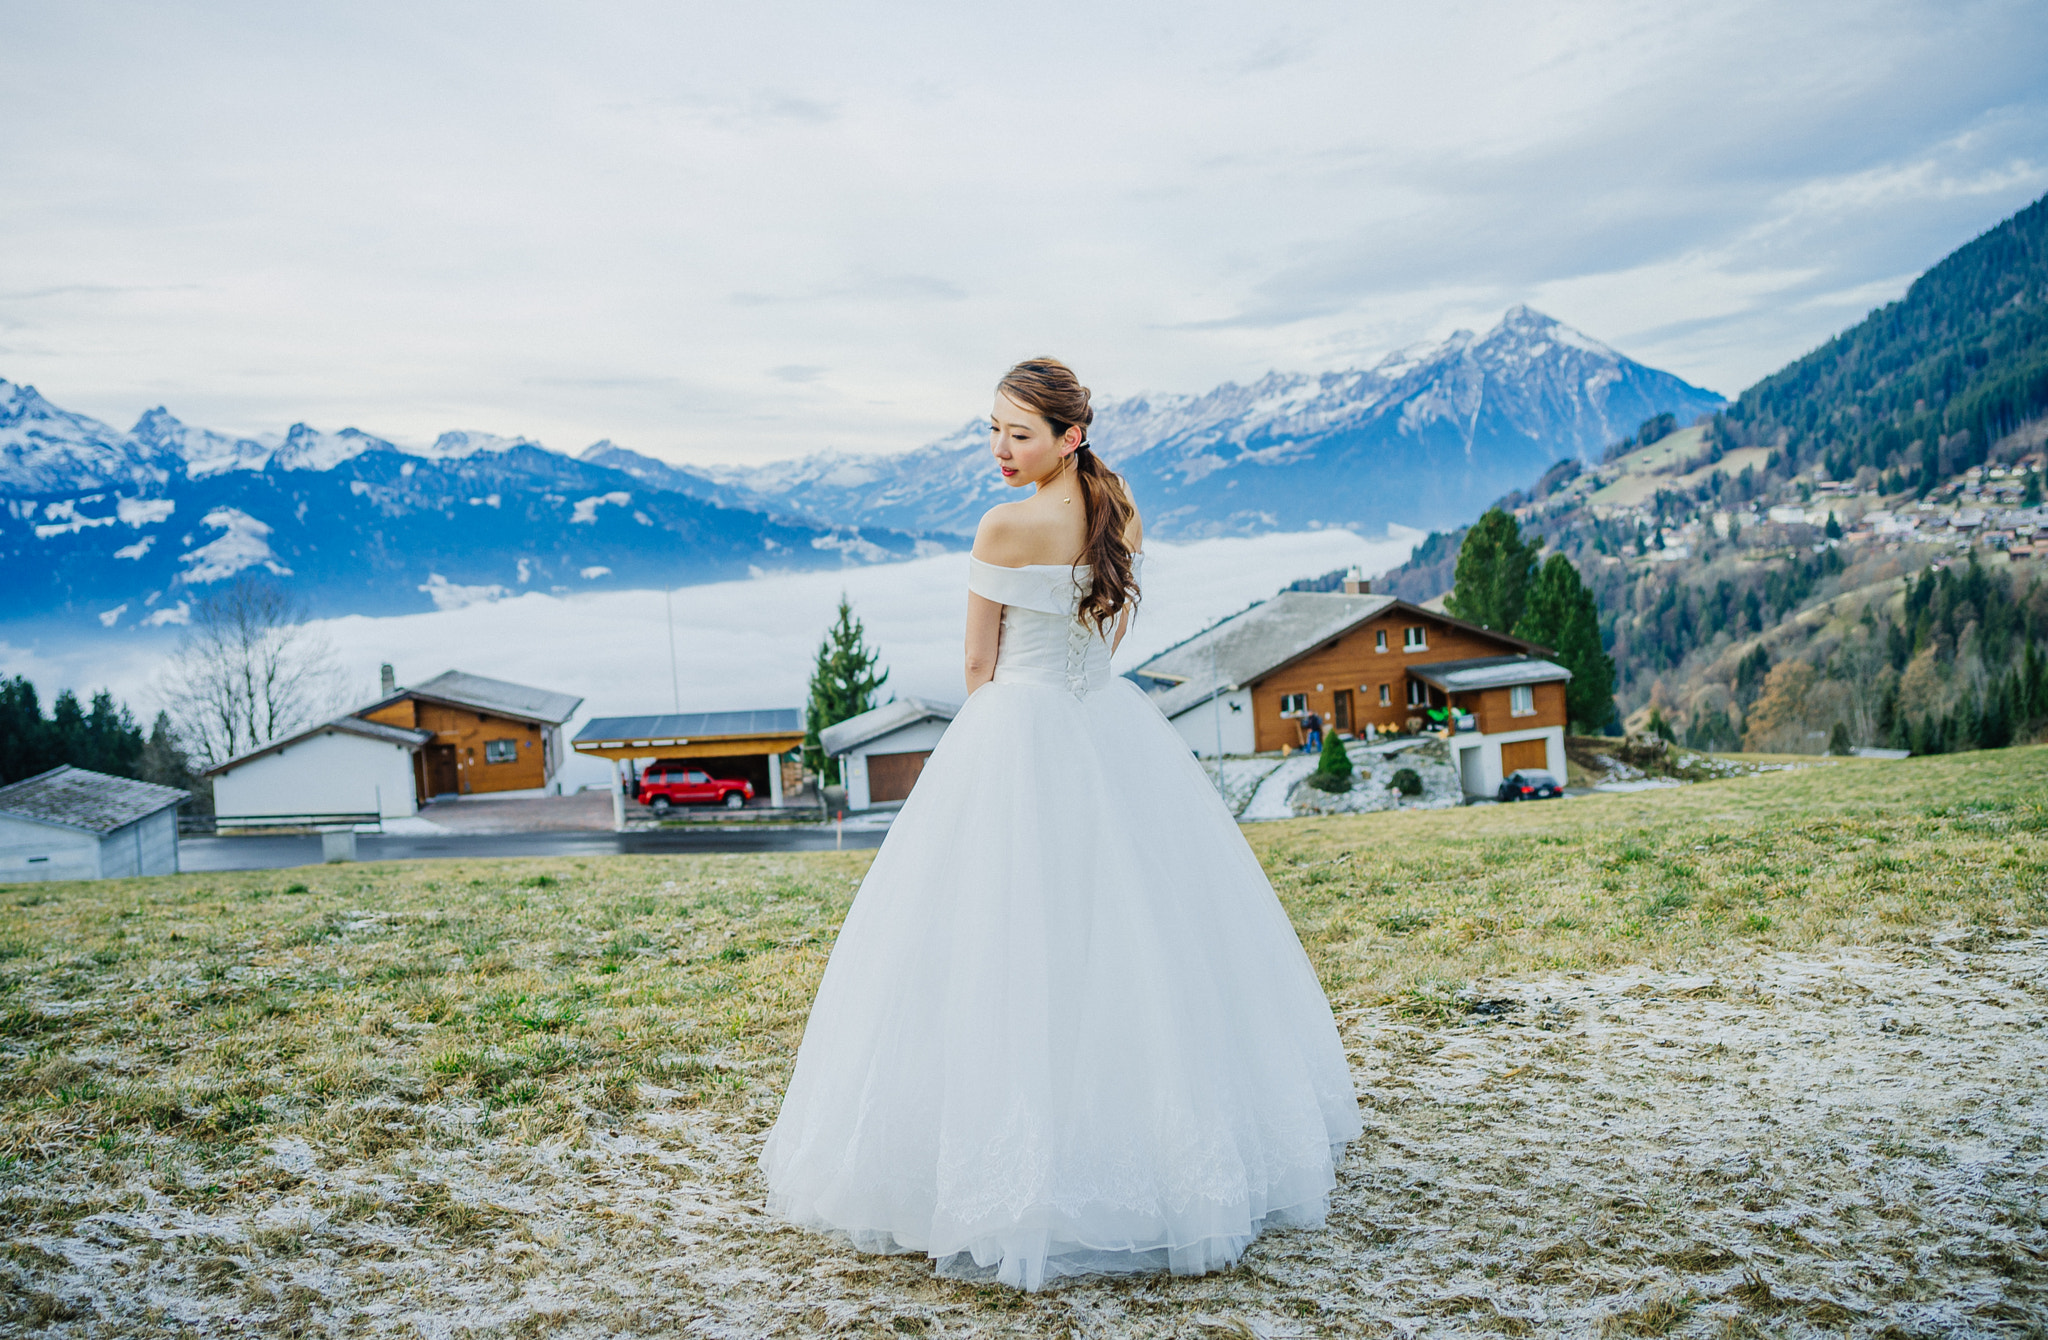 smc PENTAX-FA 645 35mm F3.5 AL [IF] sample photo. Wedding in winter mountains photography